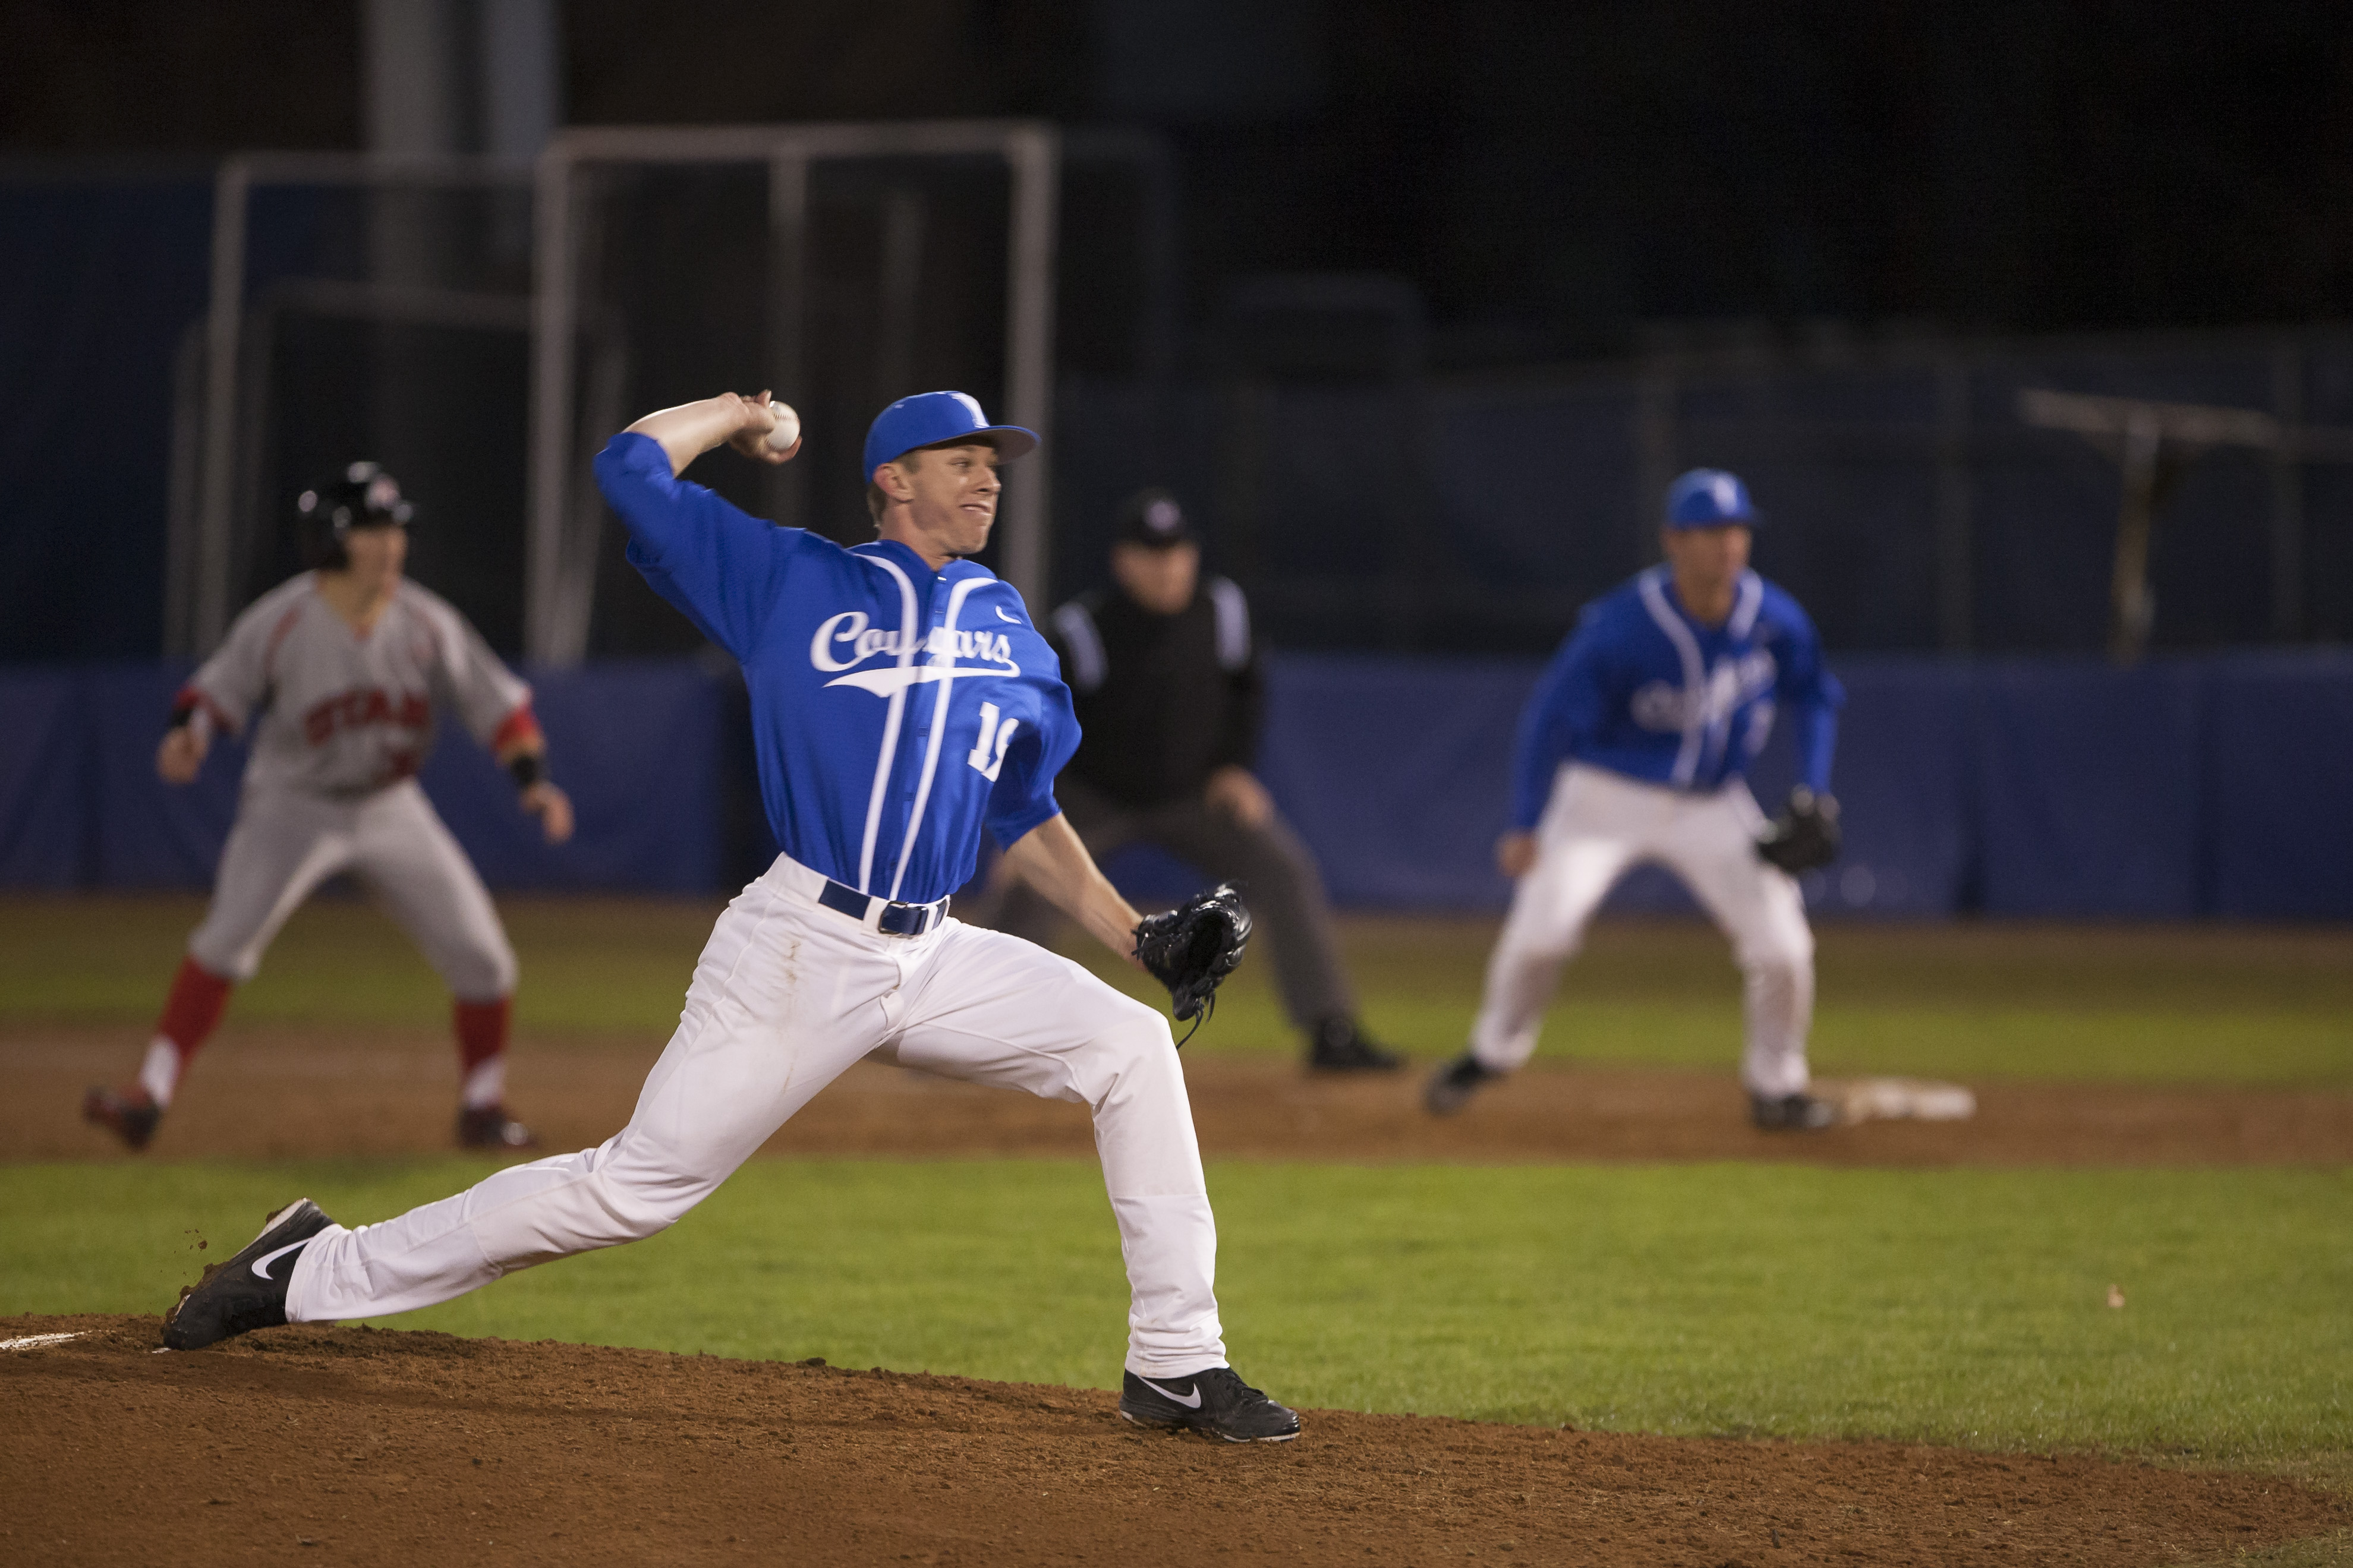 BYU baseball soars past Utah with blowout win The Daily Universe